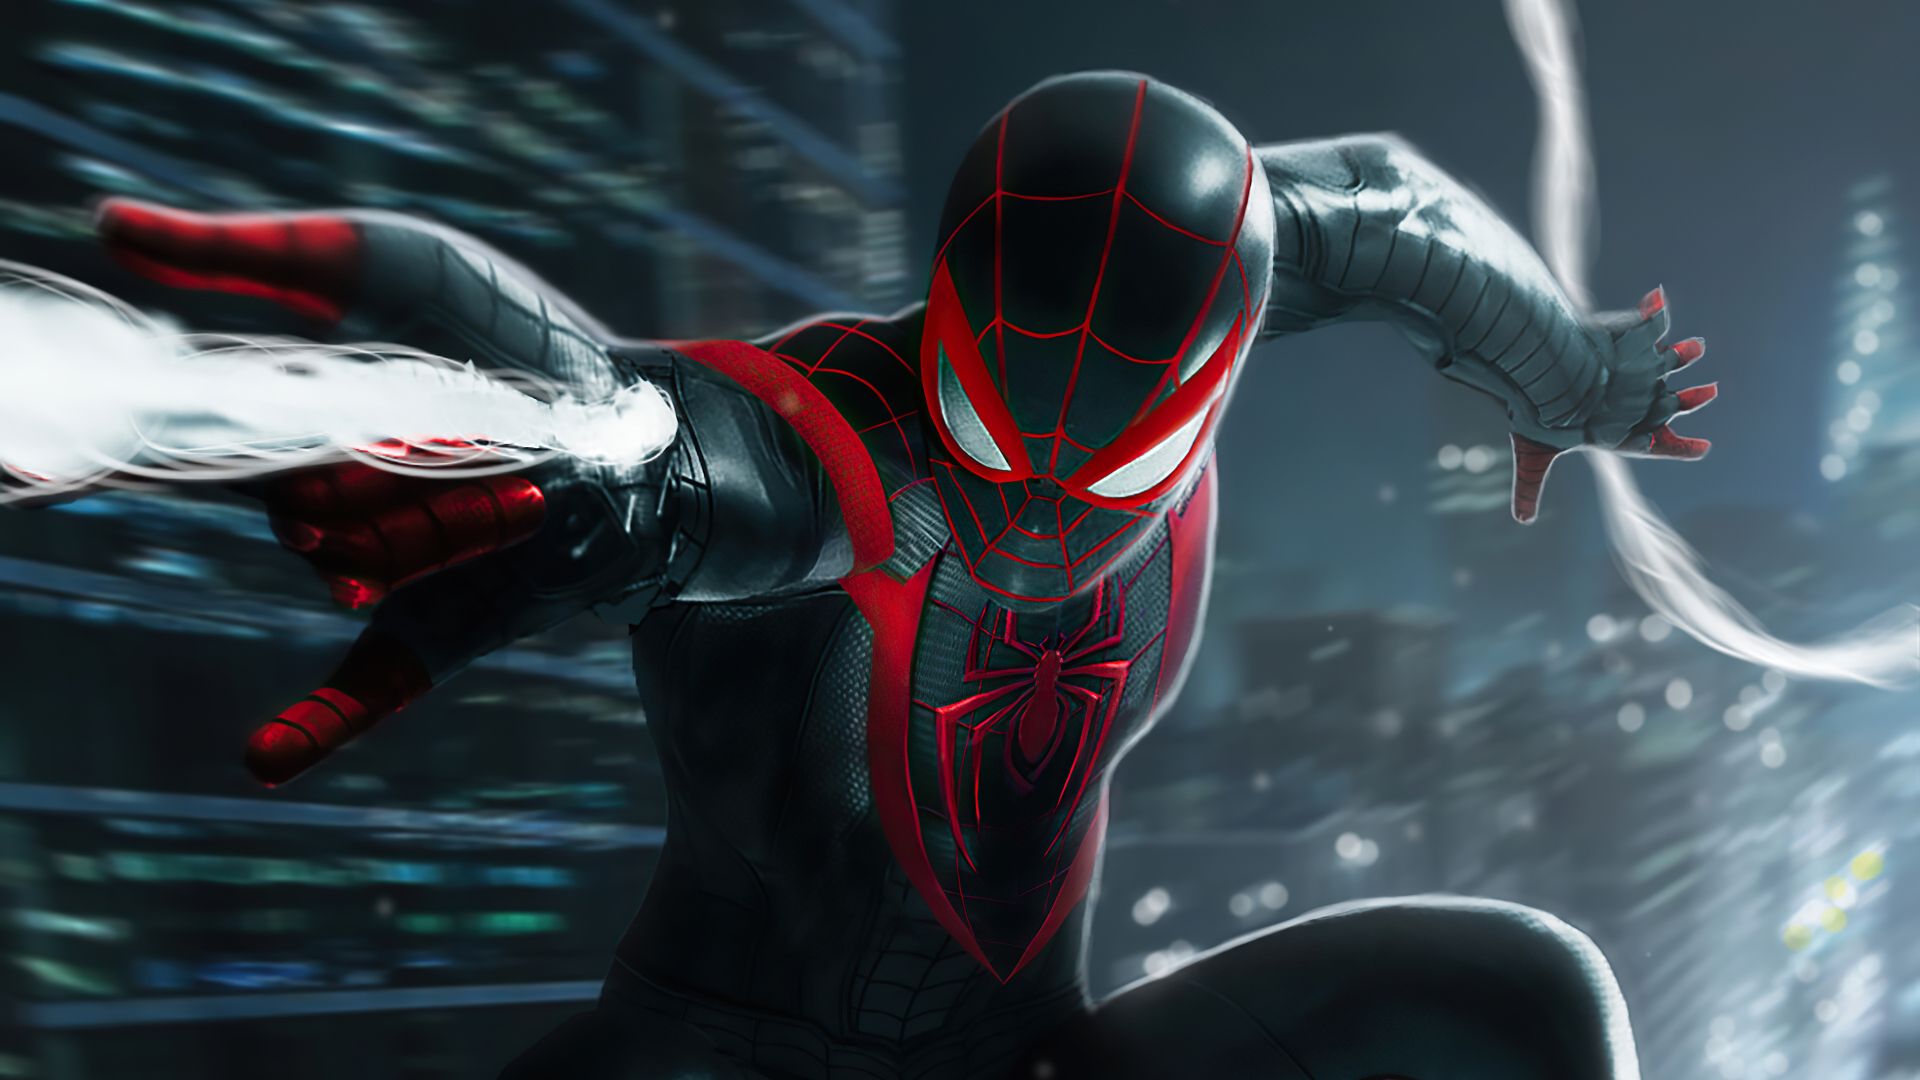 Miles Morales Spider Man Black Suit 1080P Laptop Full HD Wallpaper, HD Games 4K Wallpaper, Image, Photo And Background